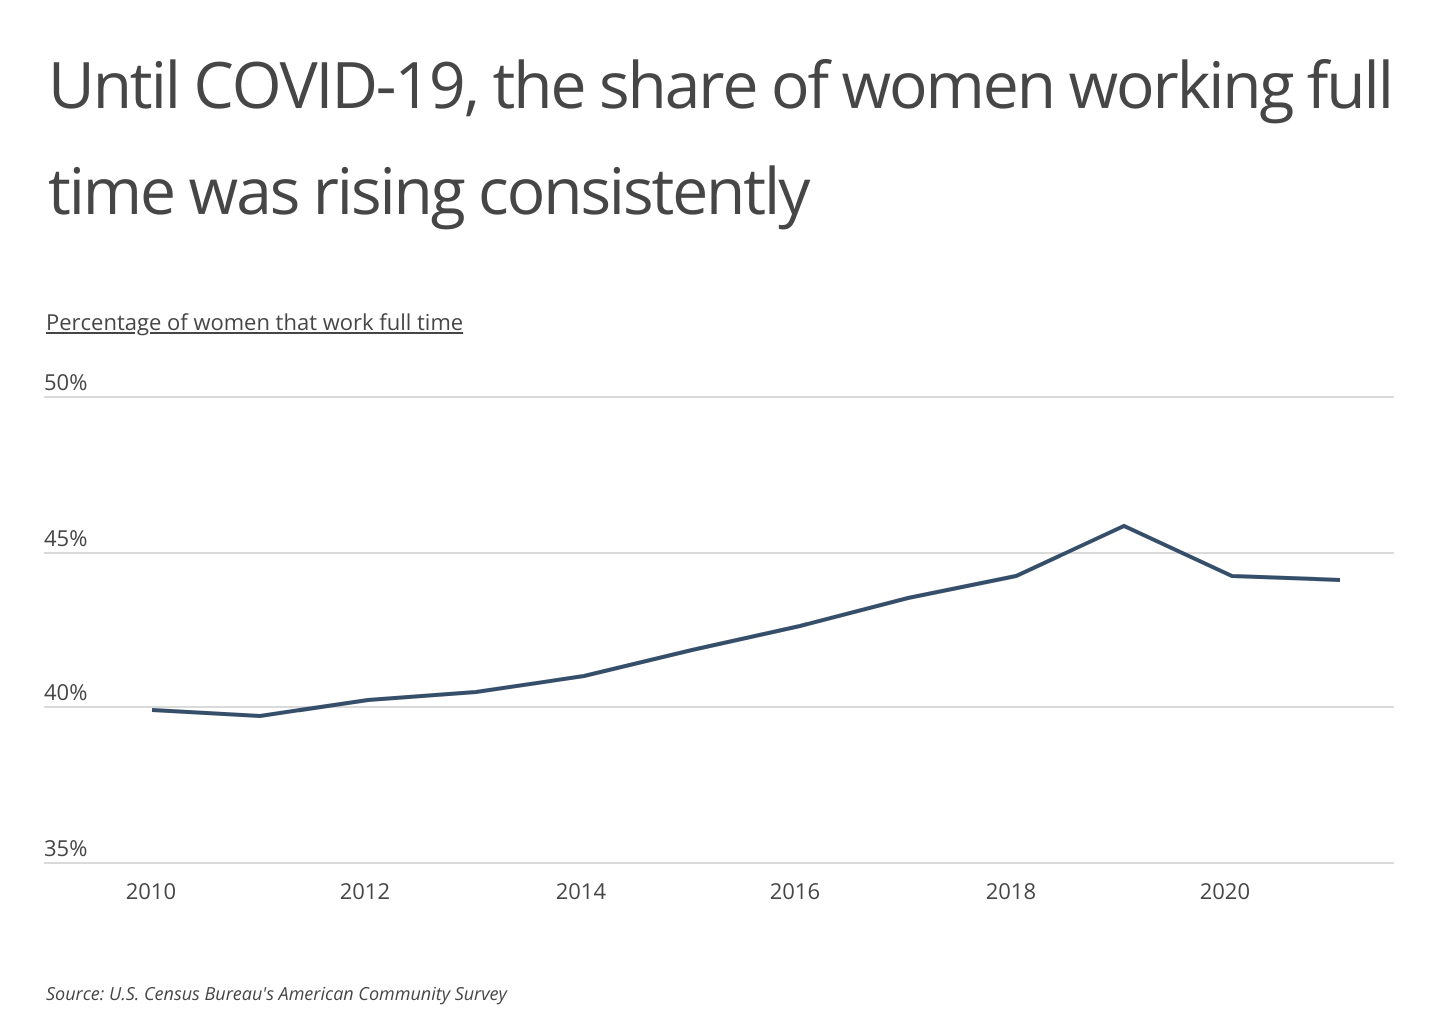 Chart1_Share of women working full time was rising consistently until COVID